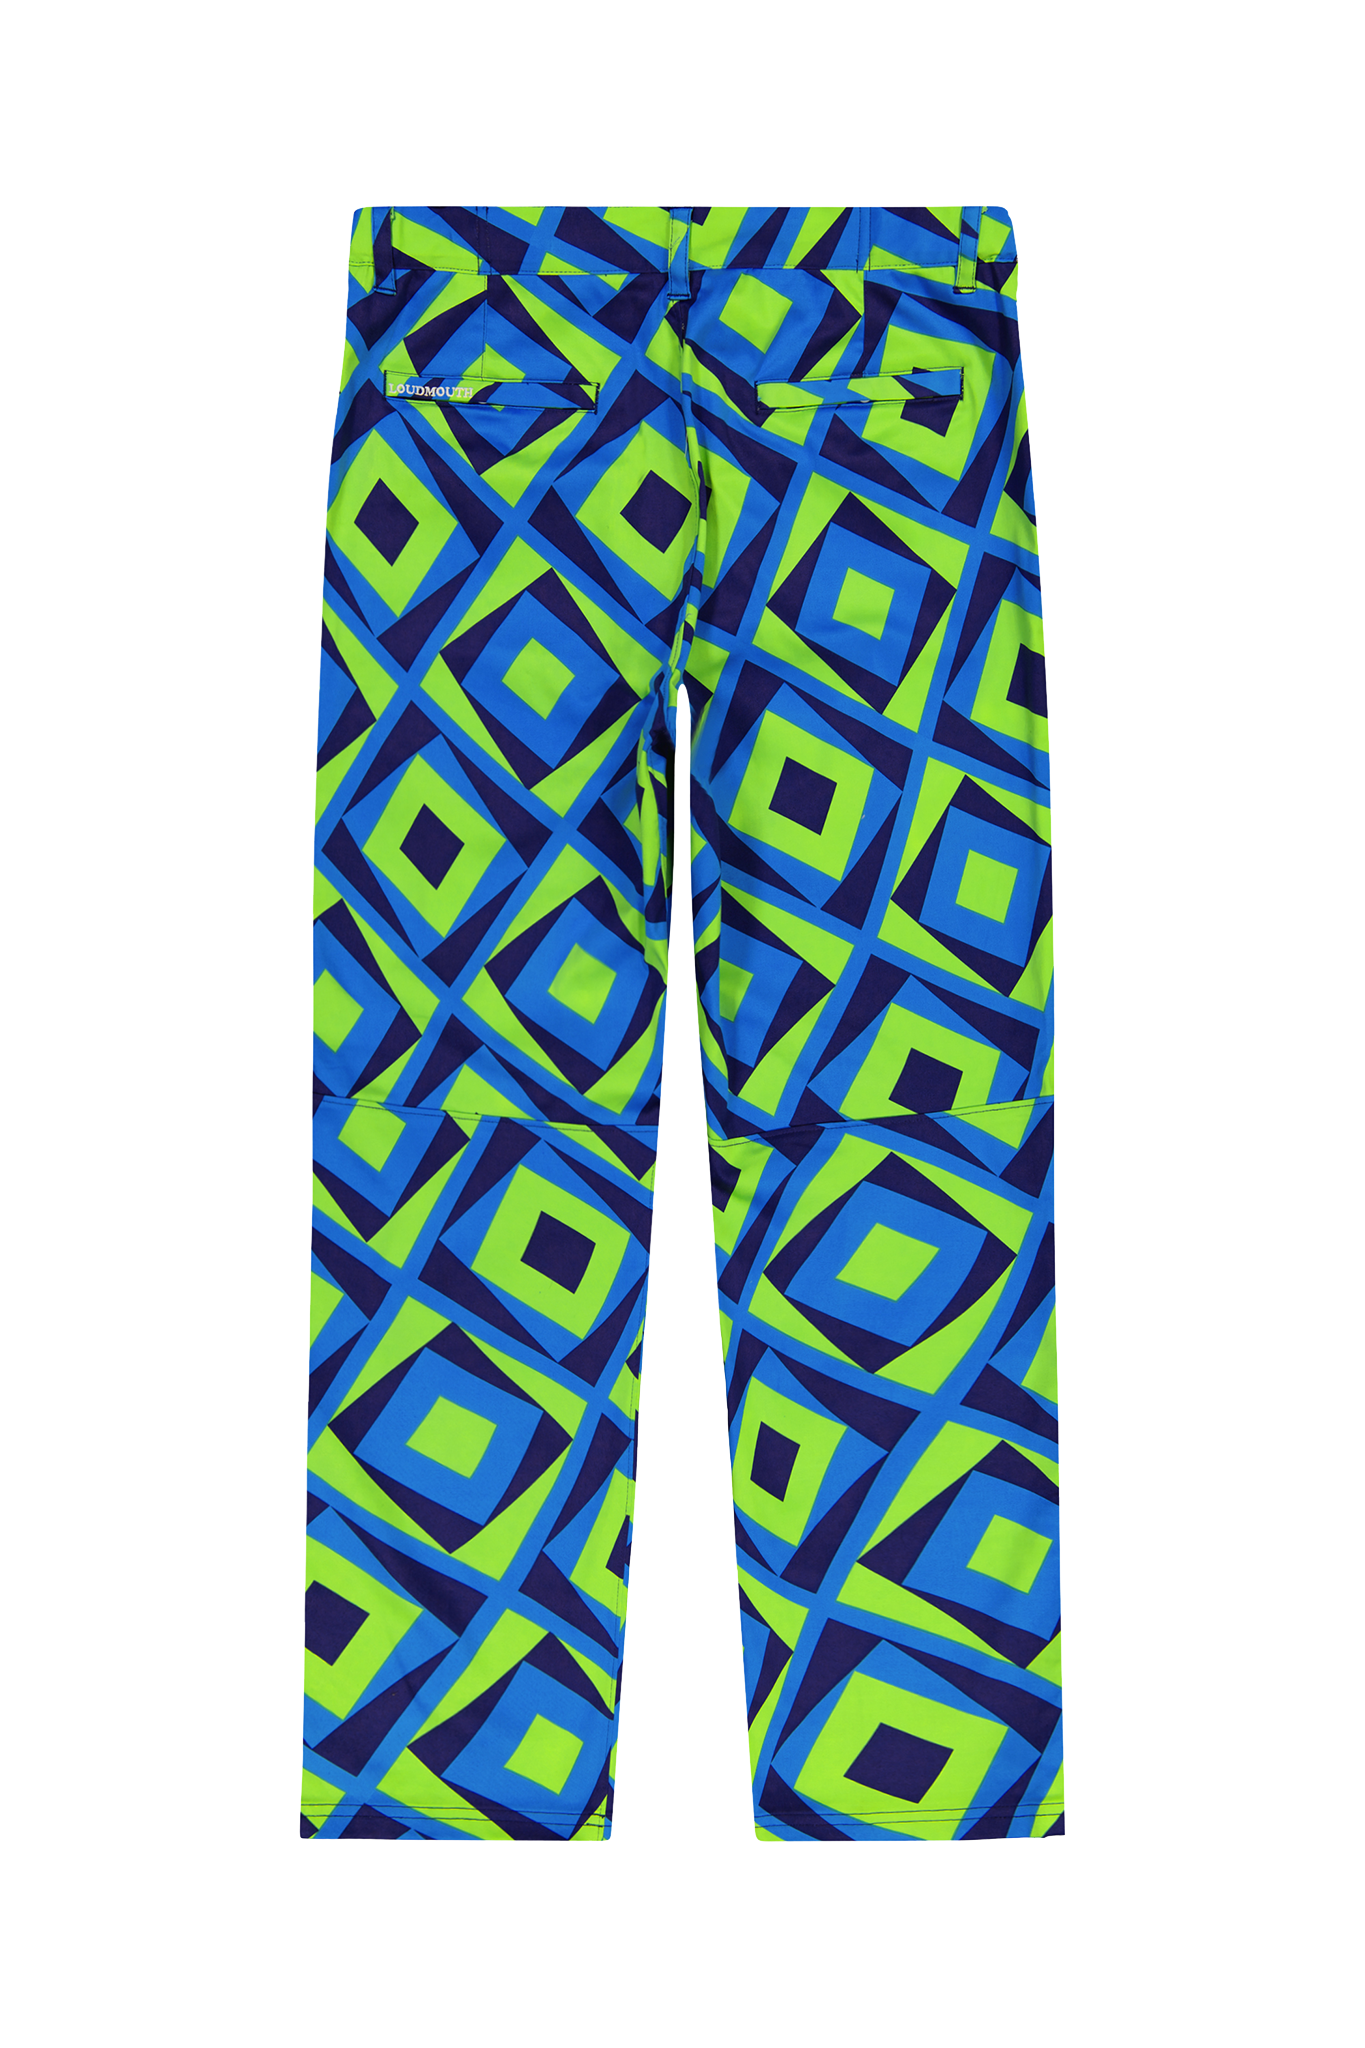 Loudmouth Golf launch new shirts  GolfMagic